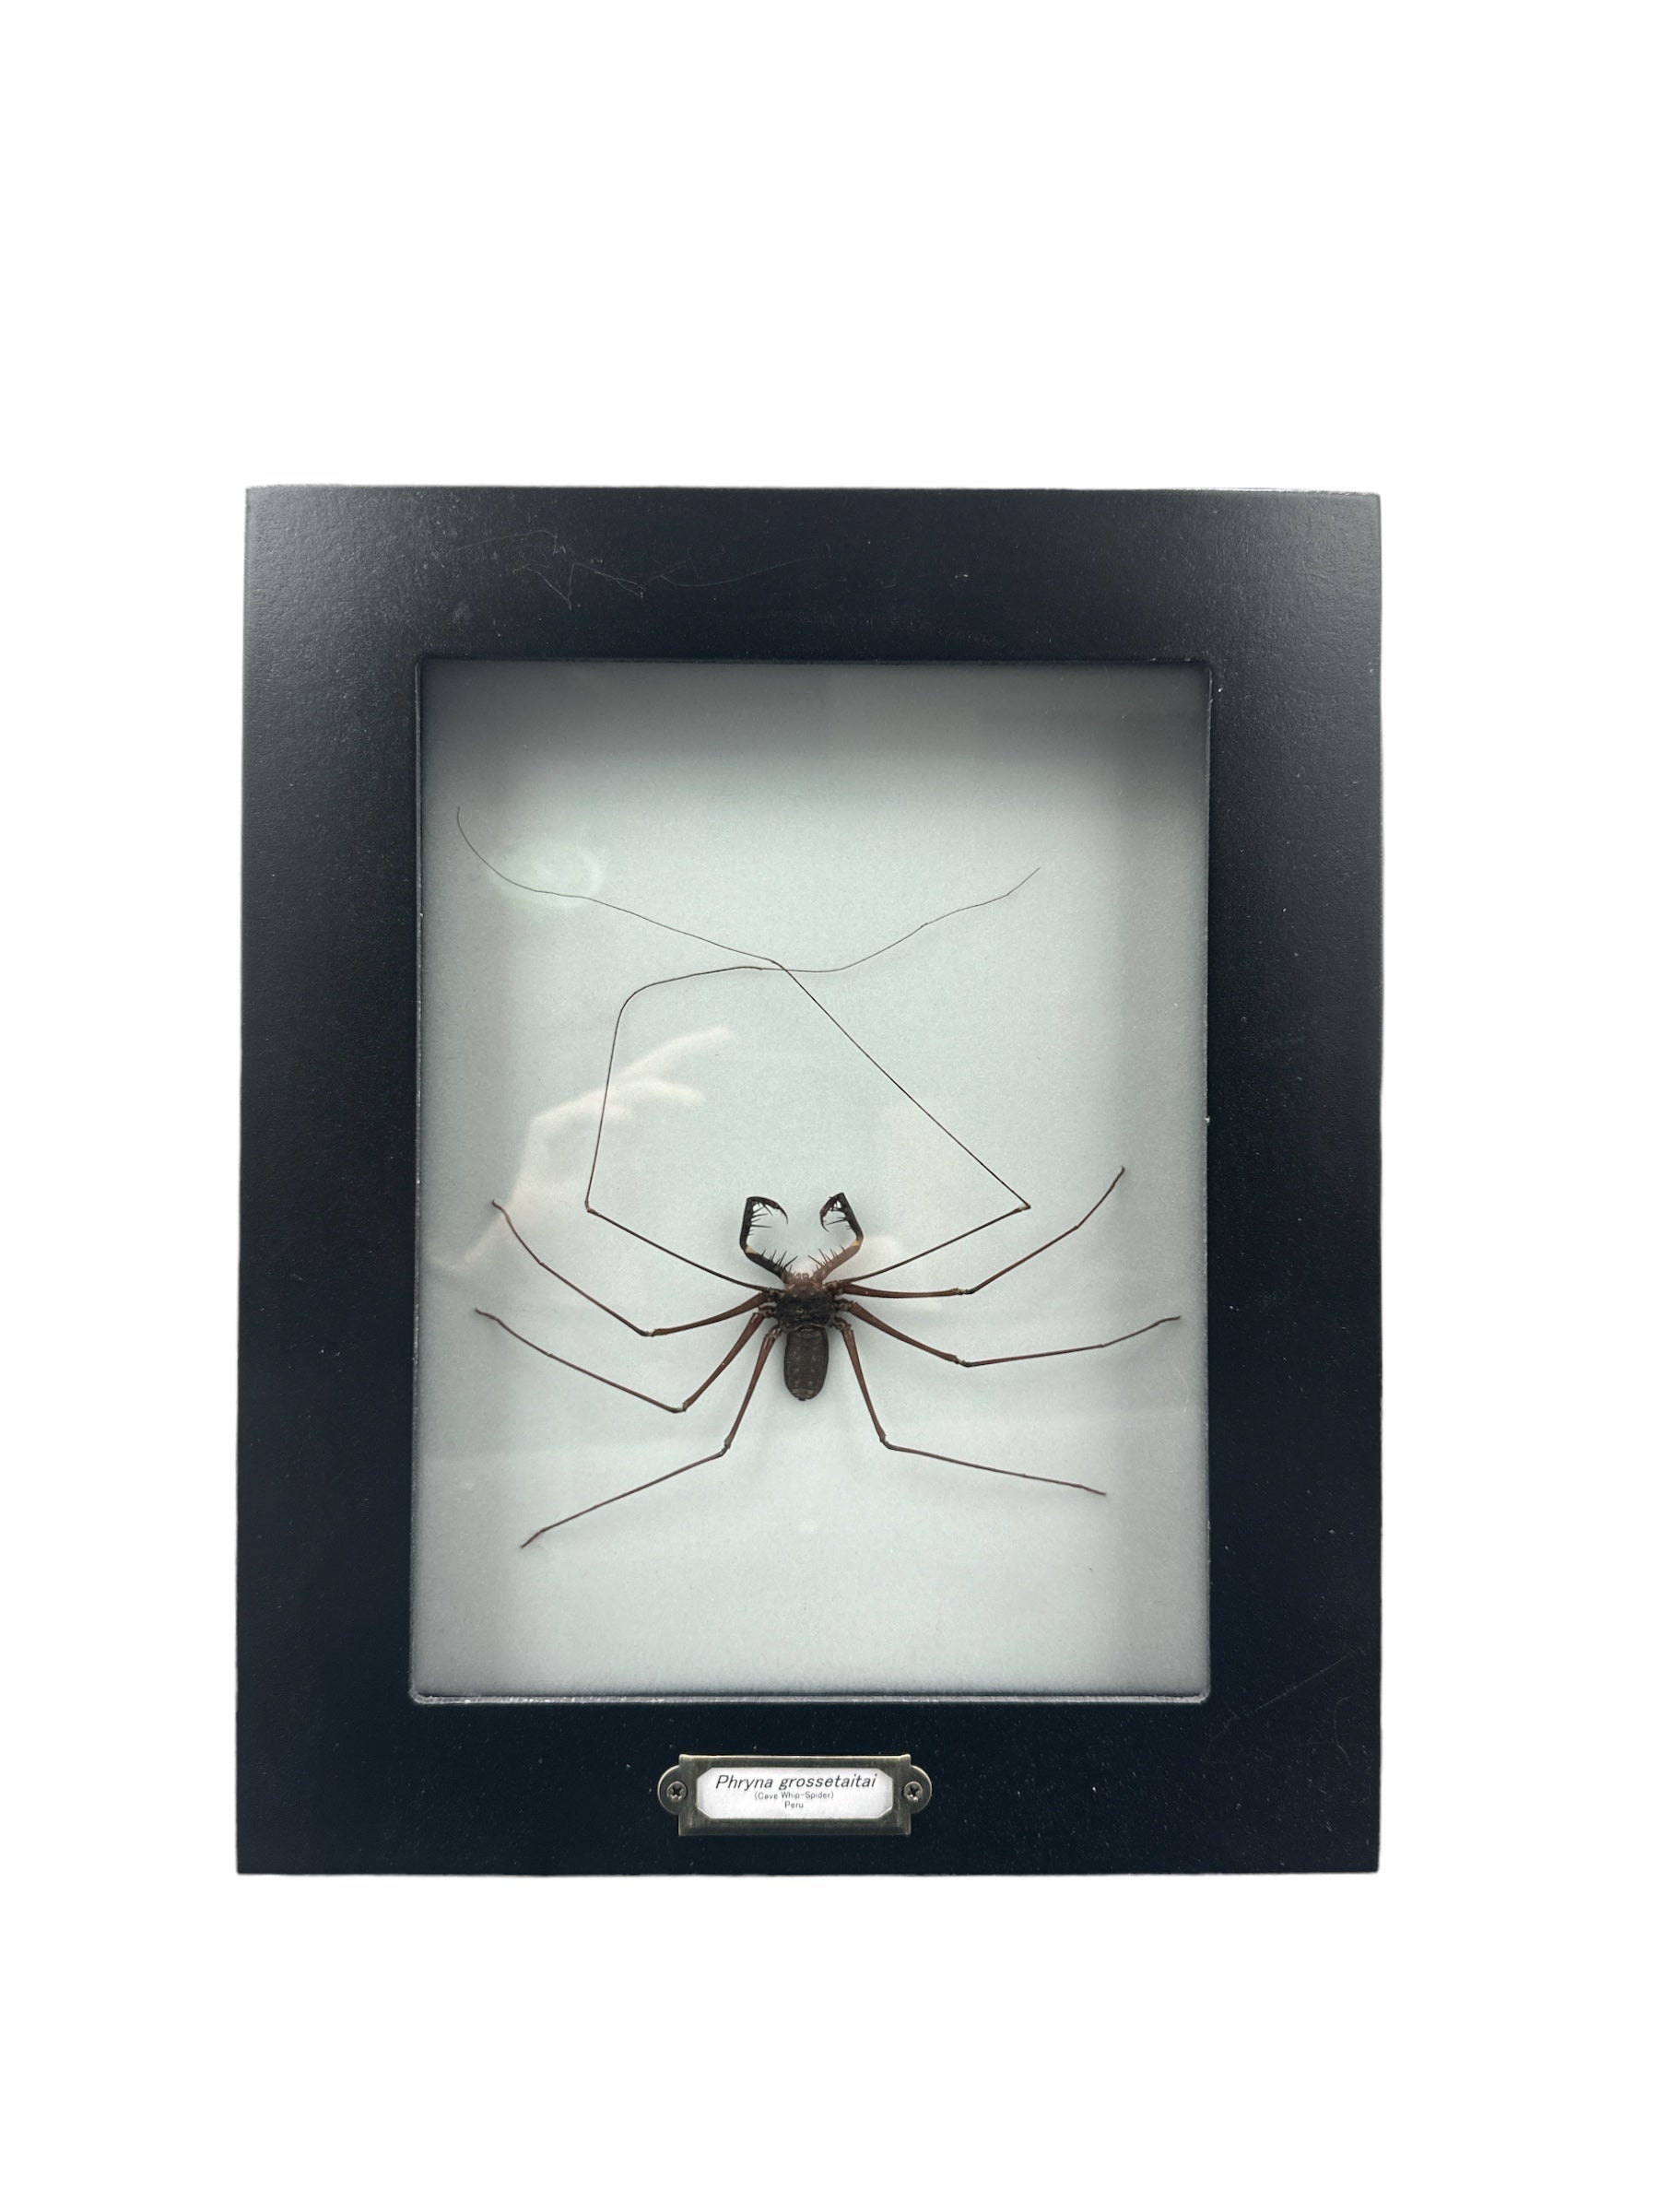 Tailless Whip Scorpions (Phryna grossetaitai) - 7x9" Frame